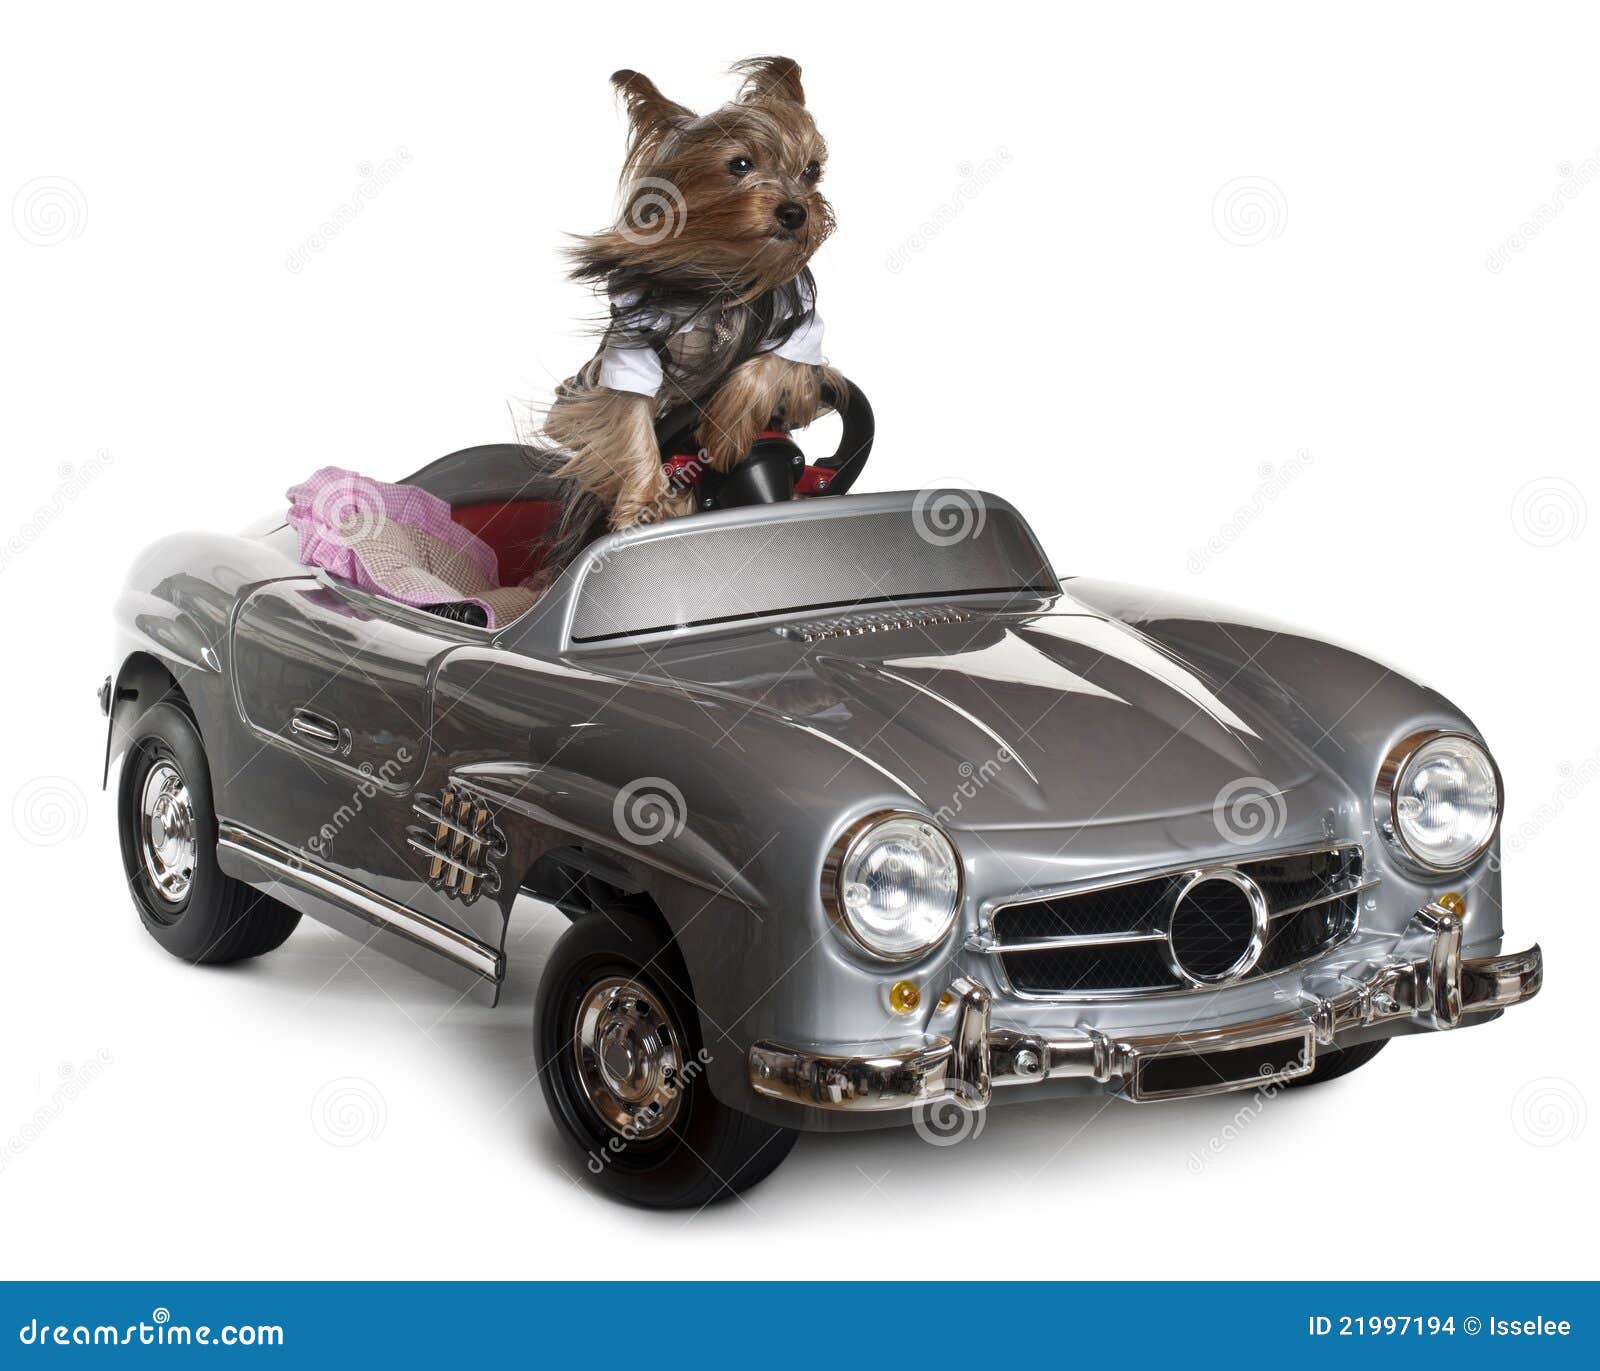 yorkshire terrier, 3 years old, driving